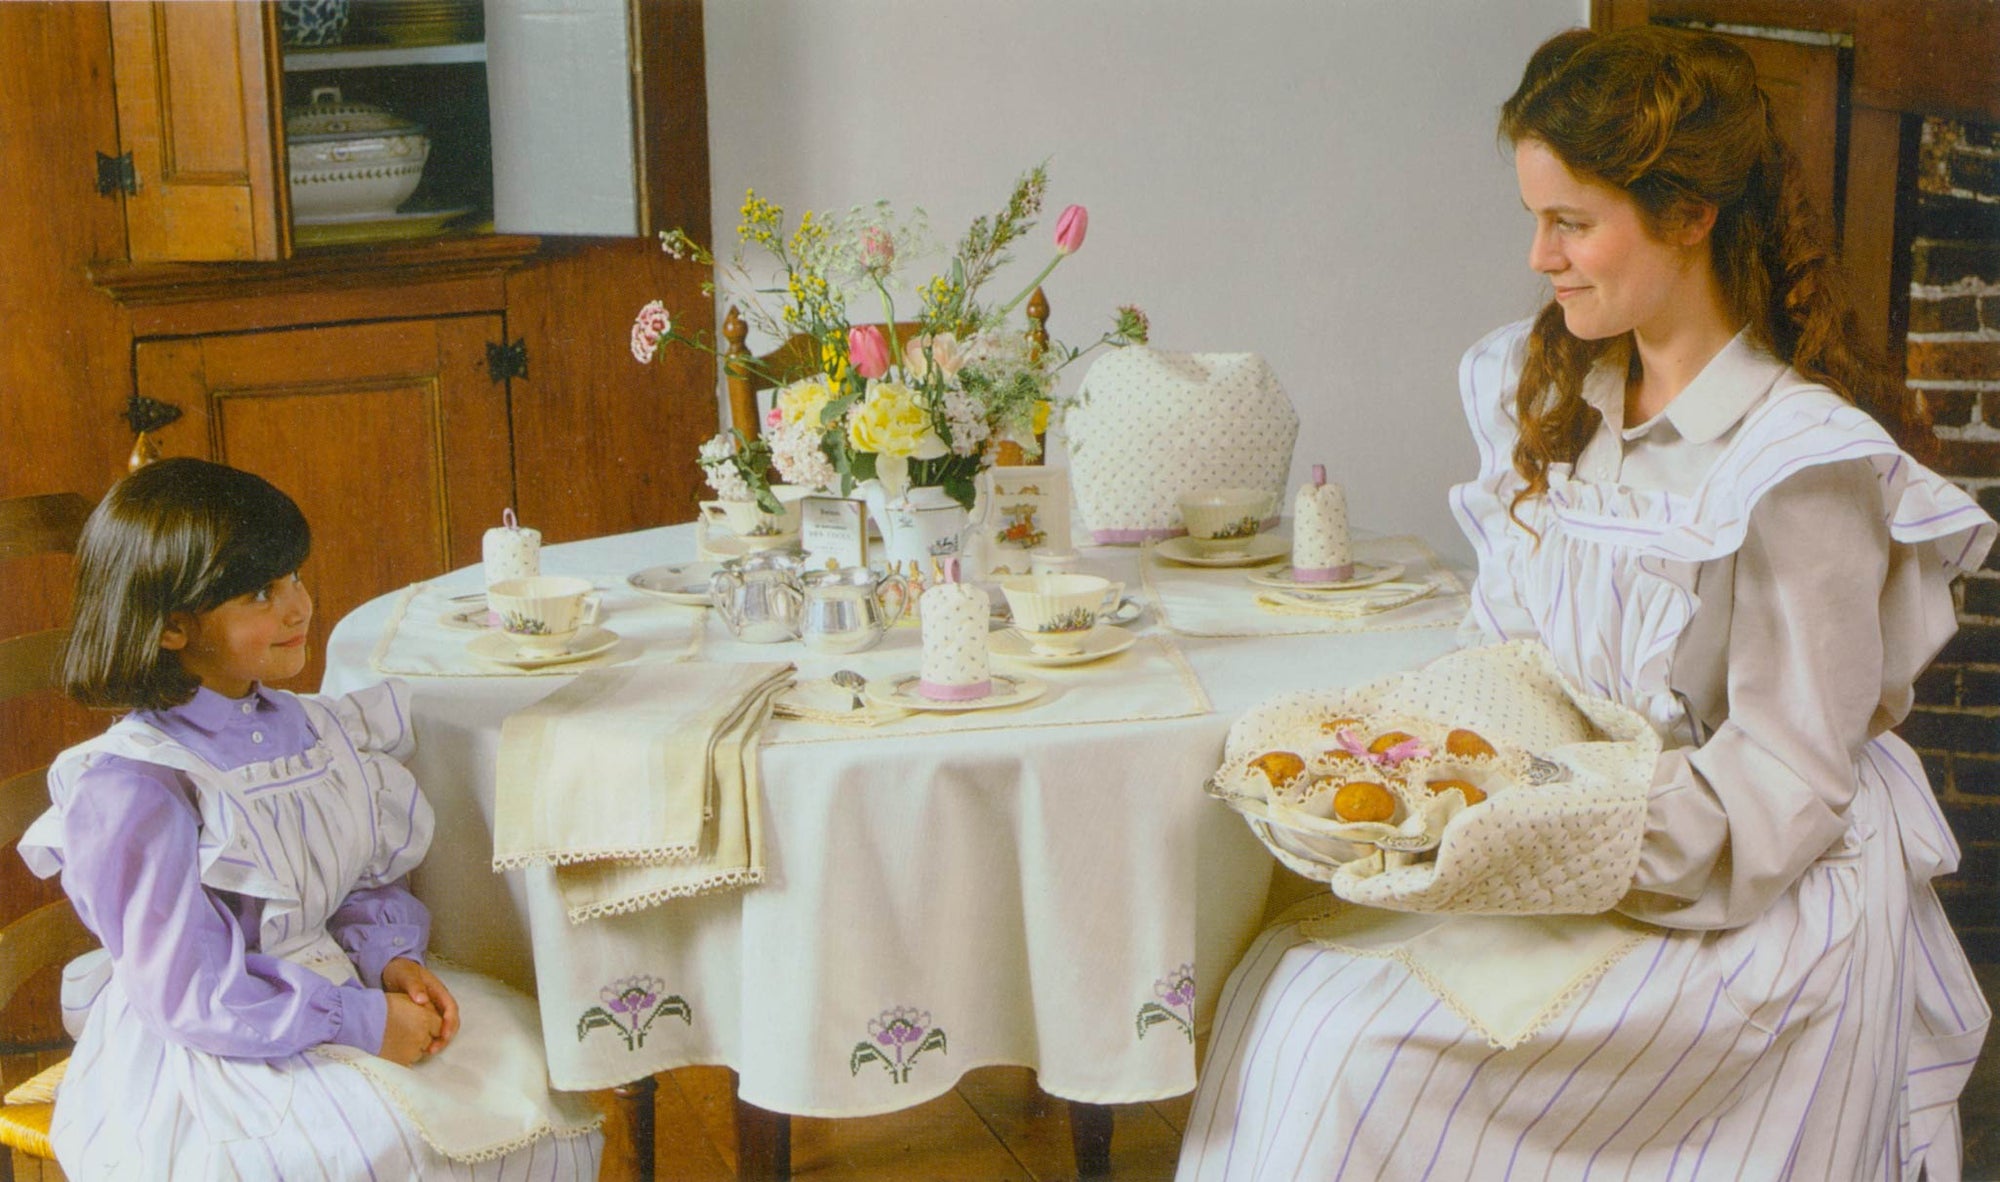 A young girl and woman sitting at a table with the tea . egg and biscuit cozy as well as the table cloth, napkins and placemats on the table. Both people are wearing the apron in a white and blue striped fabric looking at each other.